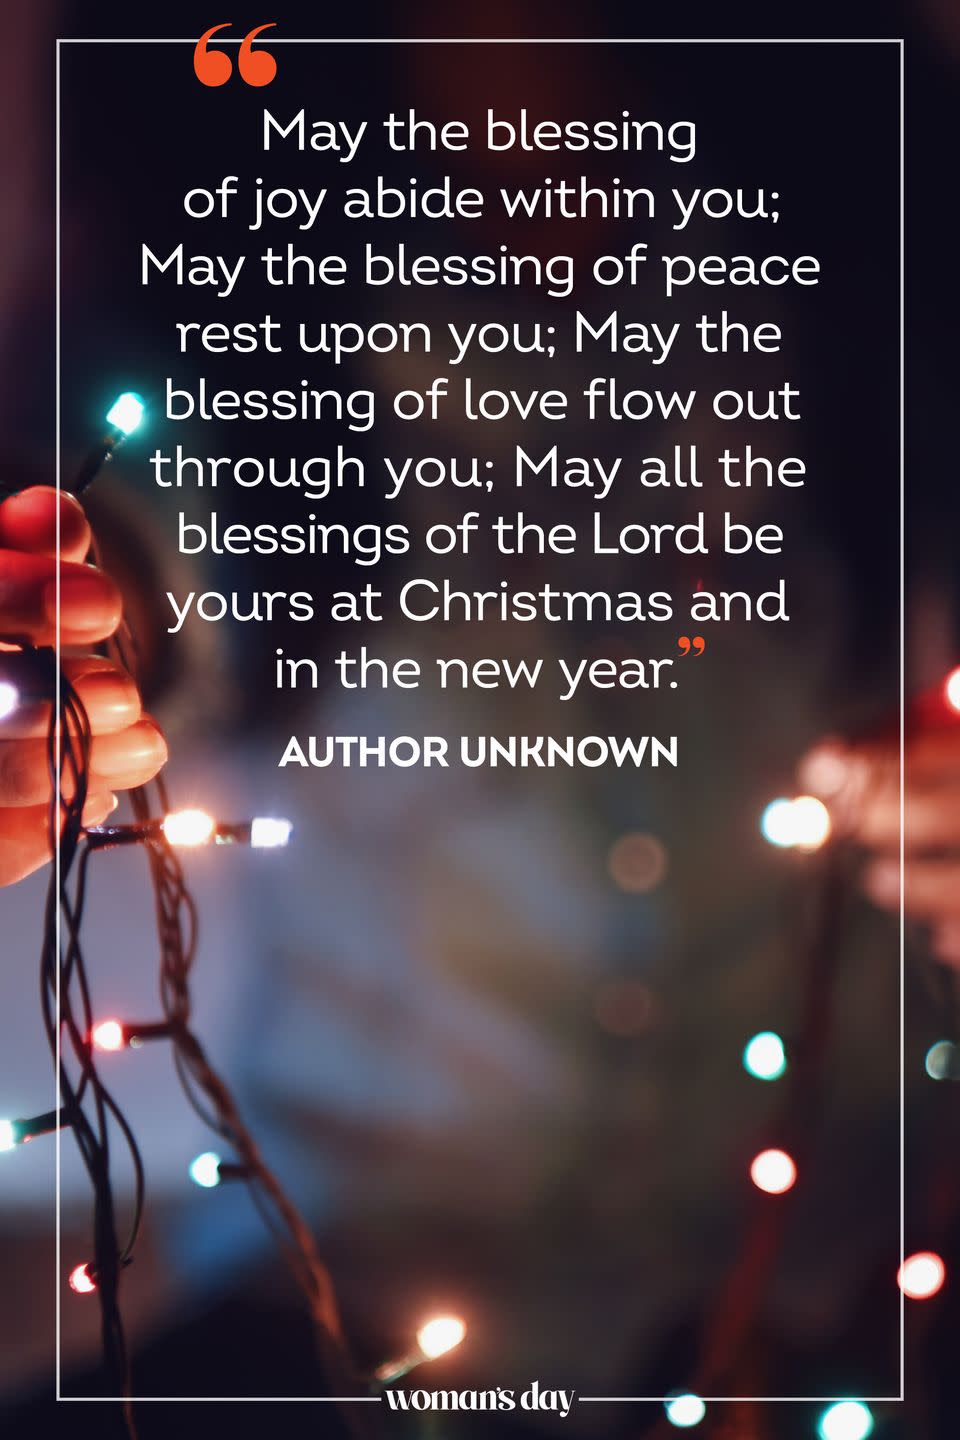 11) A Christmas Blessing for Love